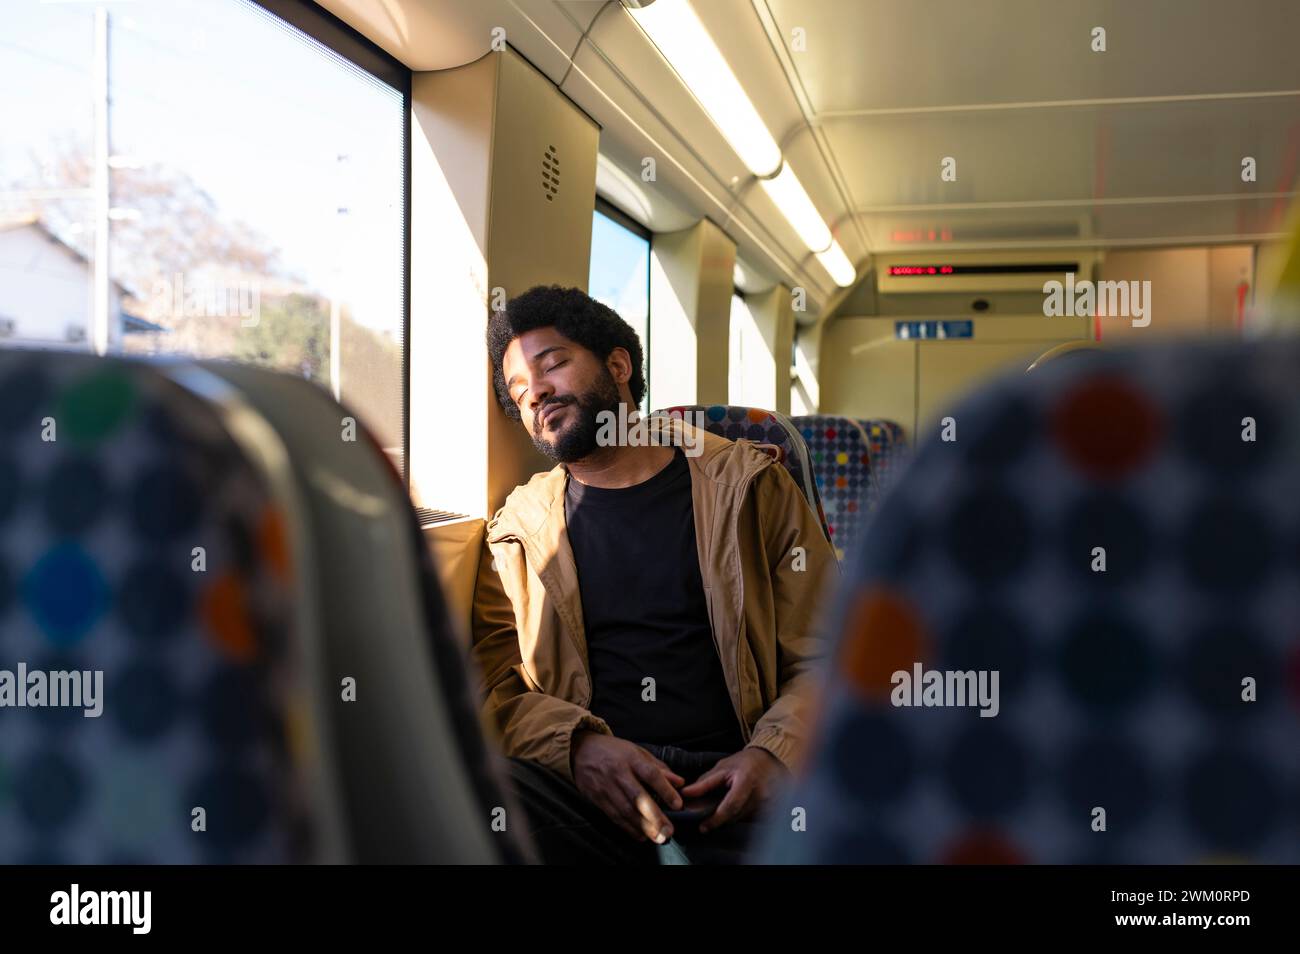 Young man napping in subway train Stock Photo